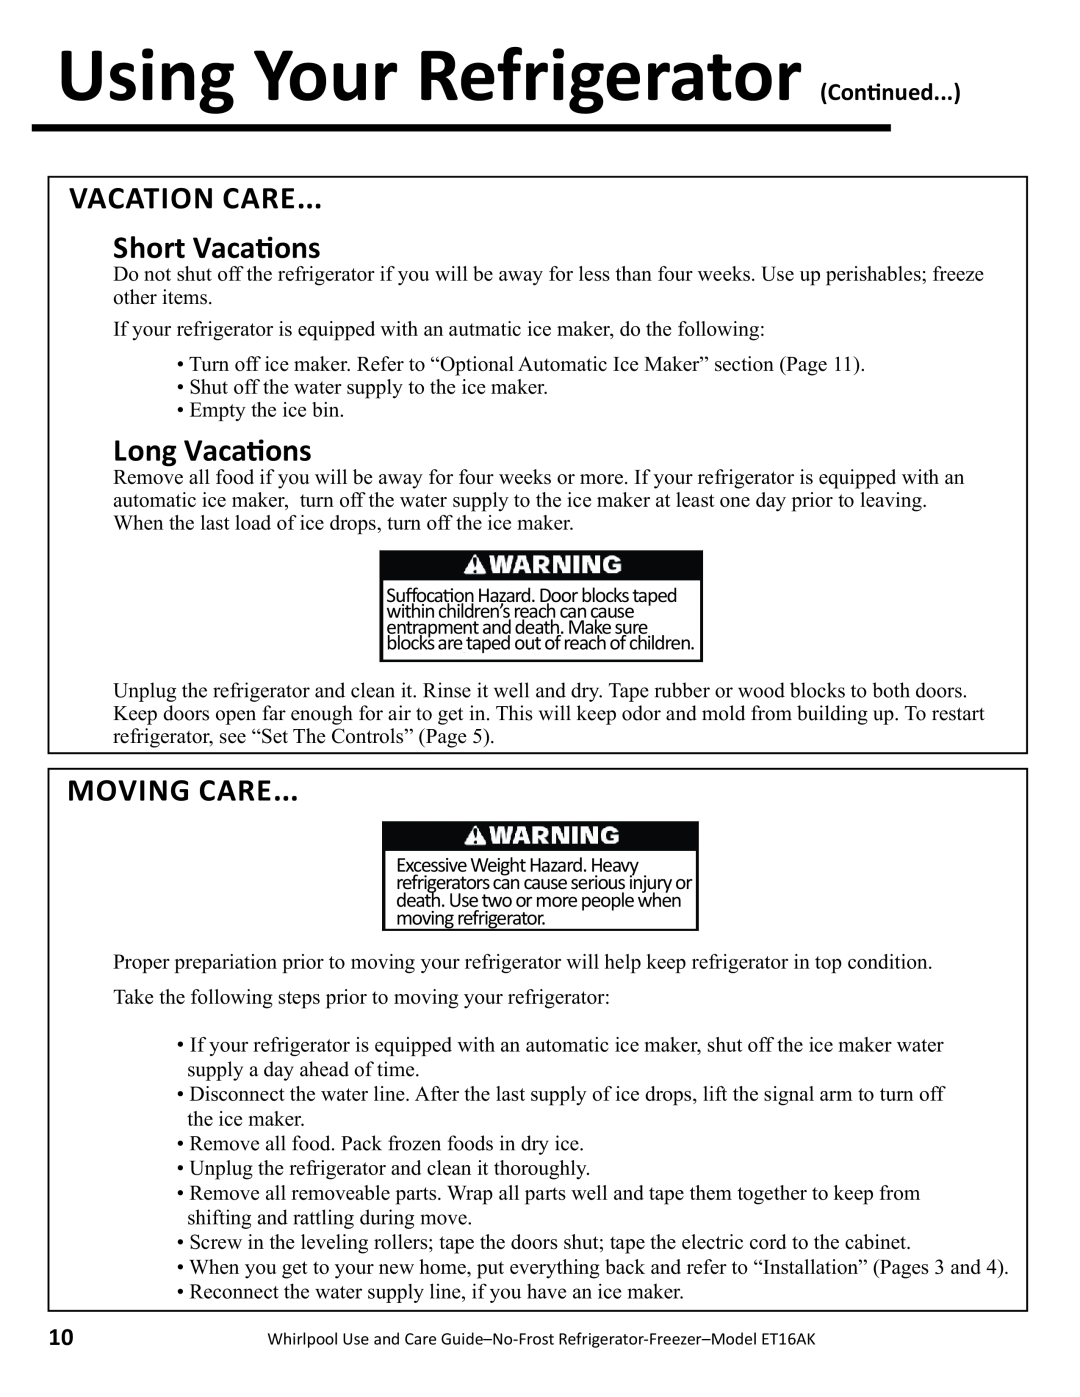 Whirlpool ET16AK manual VACATION C ARE Short Vaca/ons, Long Vaca/ons, Movi Ng Care, Using Your Refrigerator Con/nued 